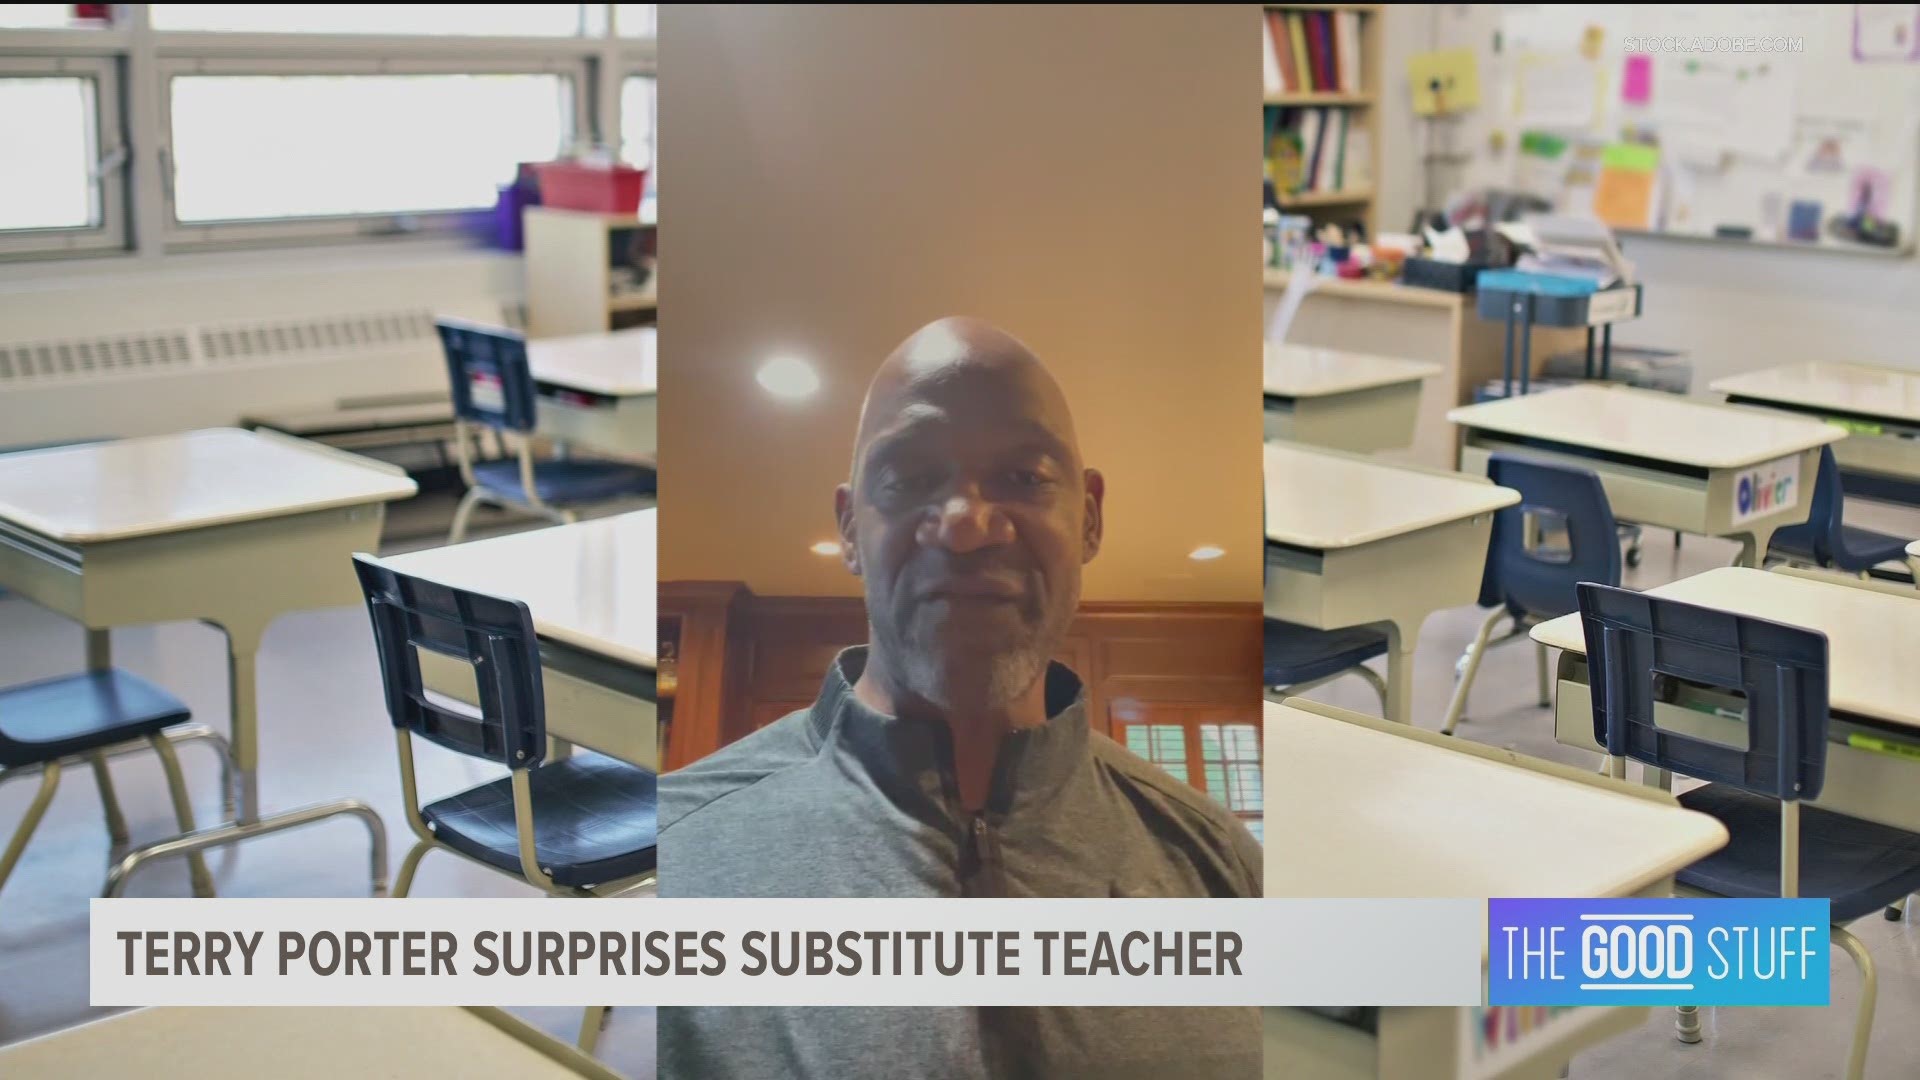 A Salem substitute teacher, who went above and beyond to help students, was surprised with a video message from Terry Porter.